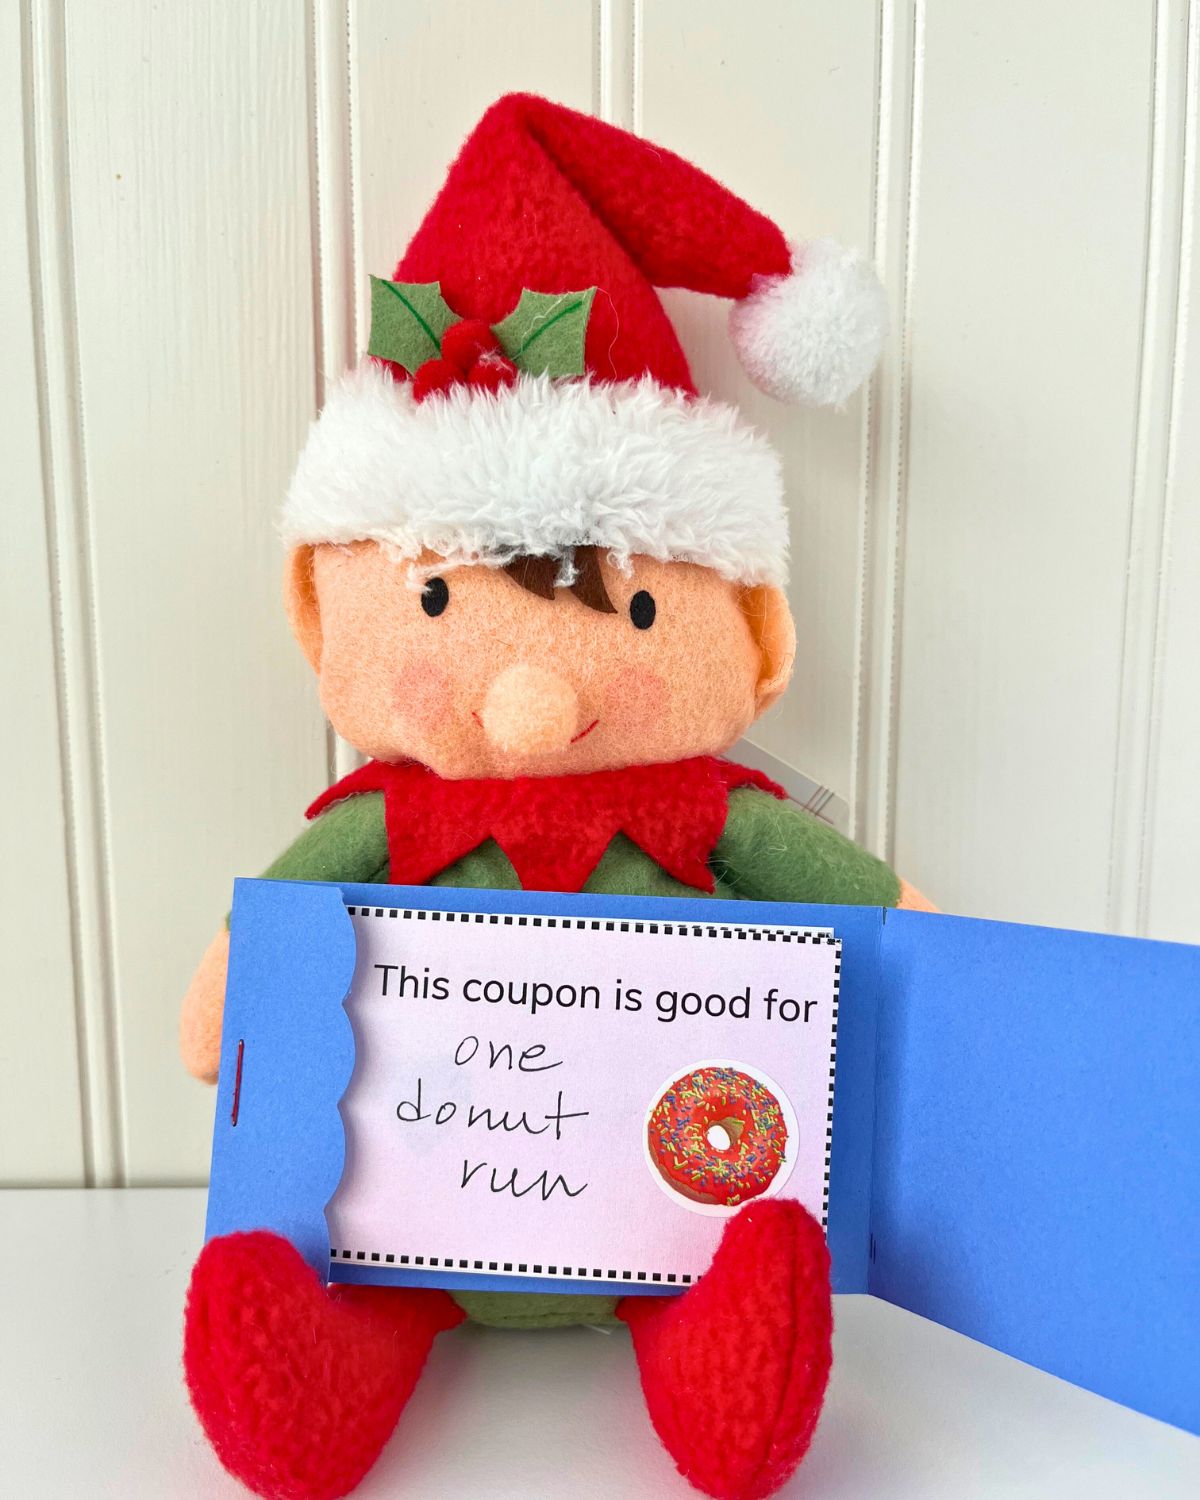 toy elf holding an open coupon book, with the front coupon good for one donut run.